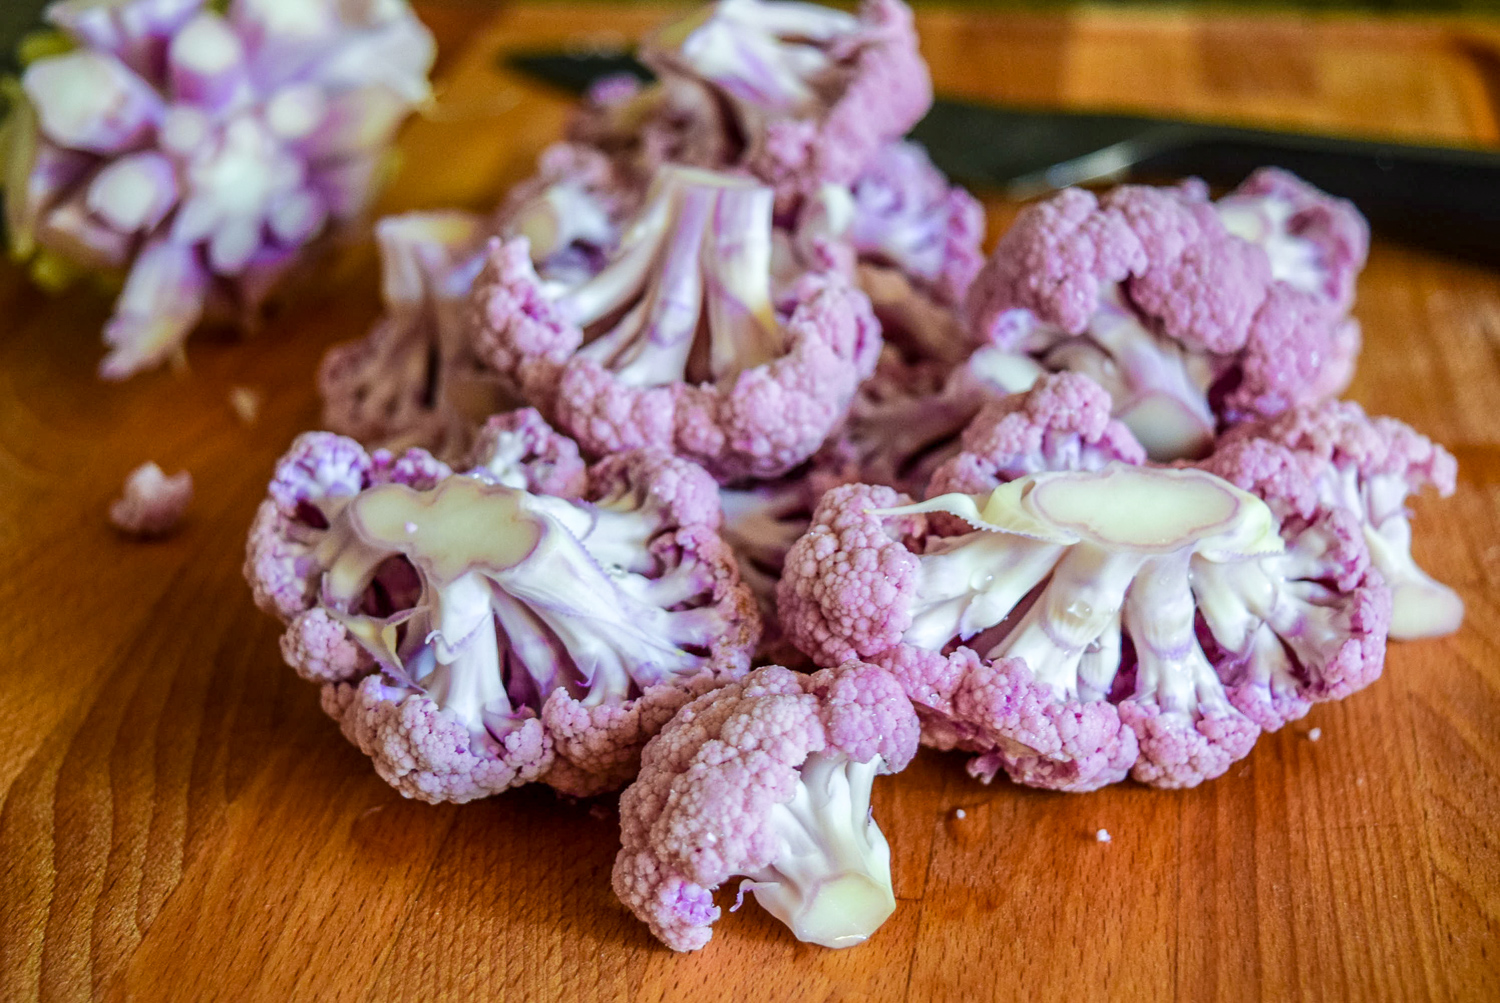 Raw purple cauliflower florets on cuttingboard with stem and knife in background